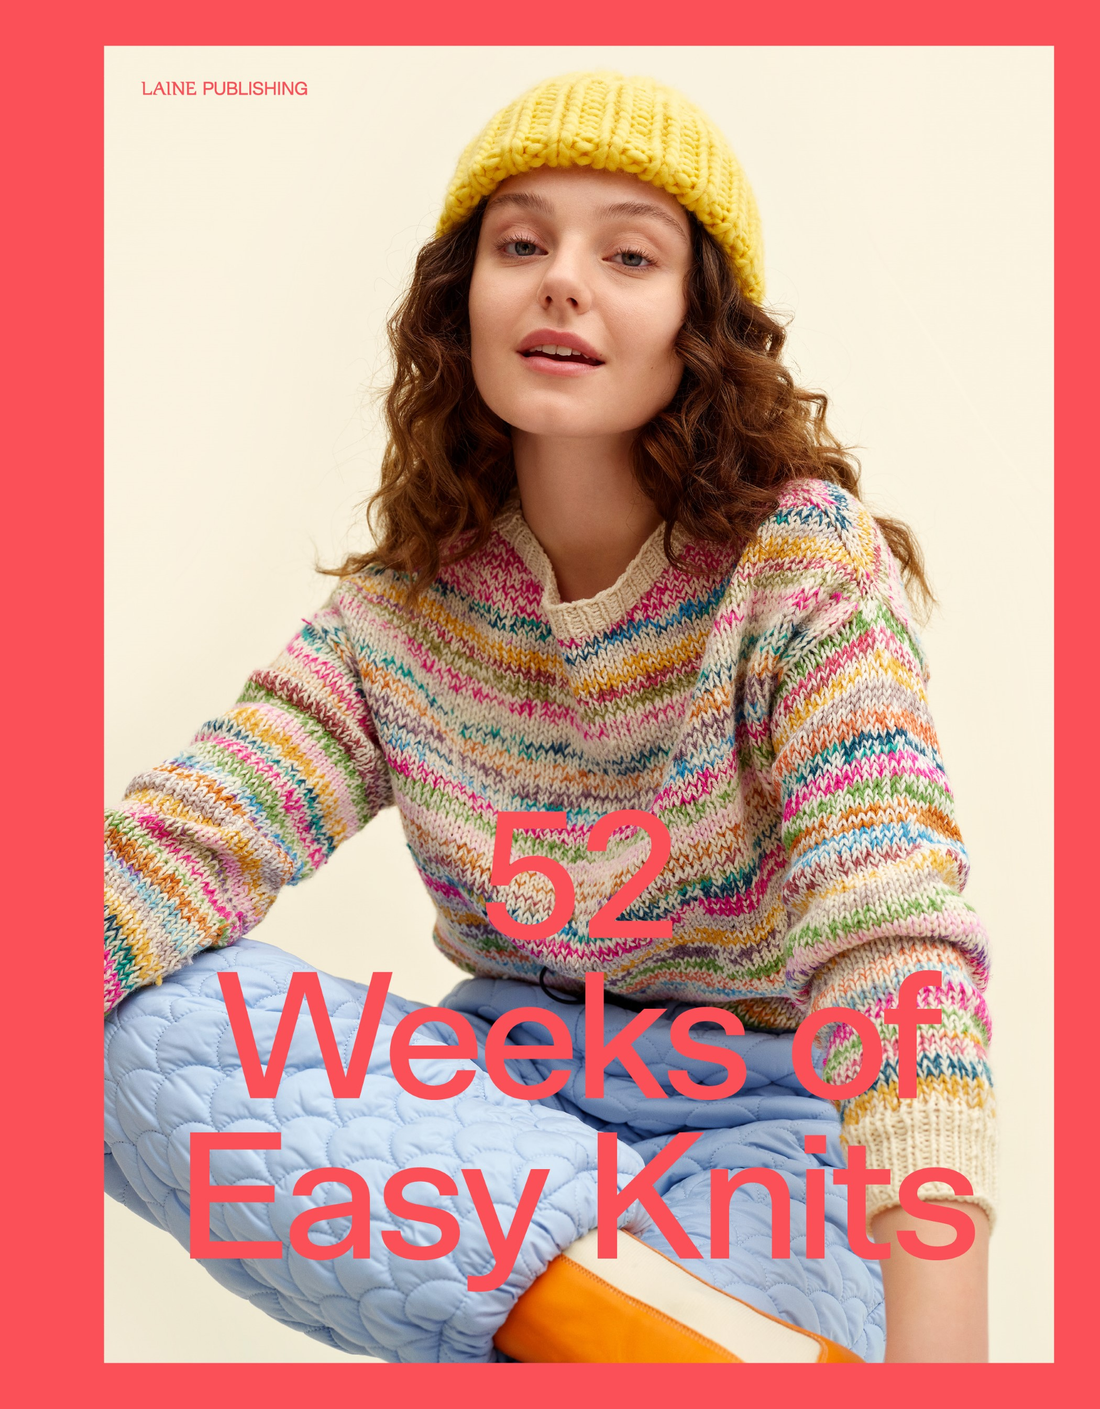  52 weeks of easy knits cover